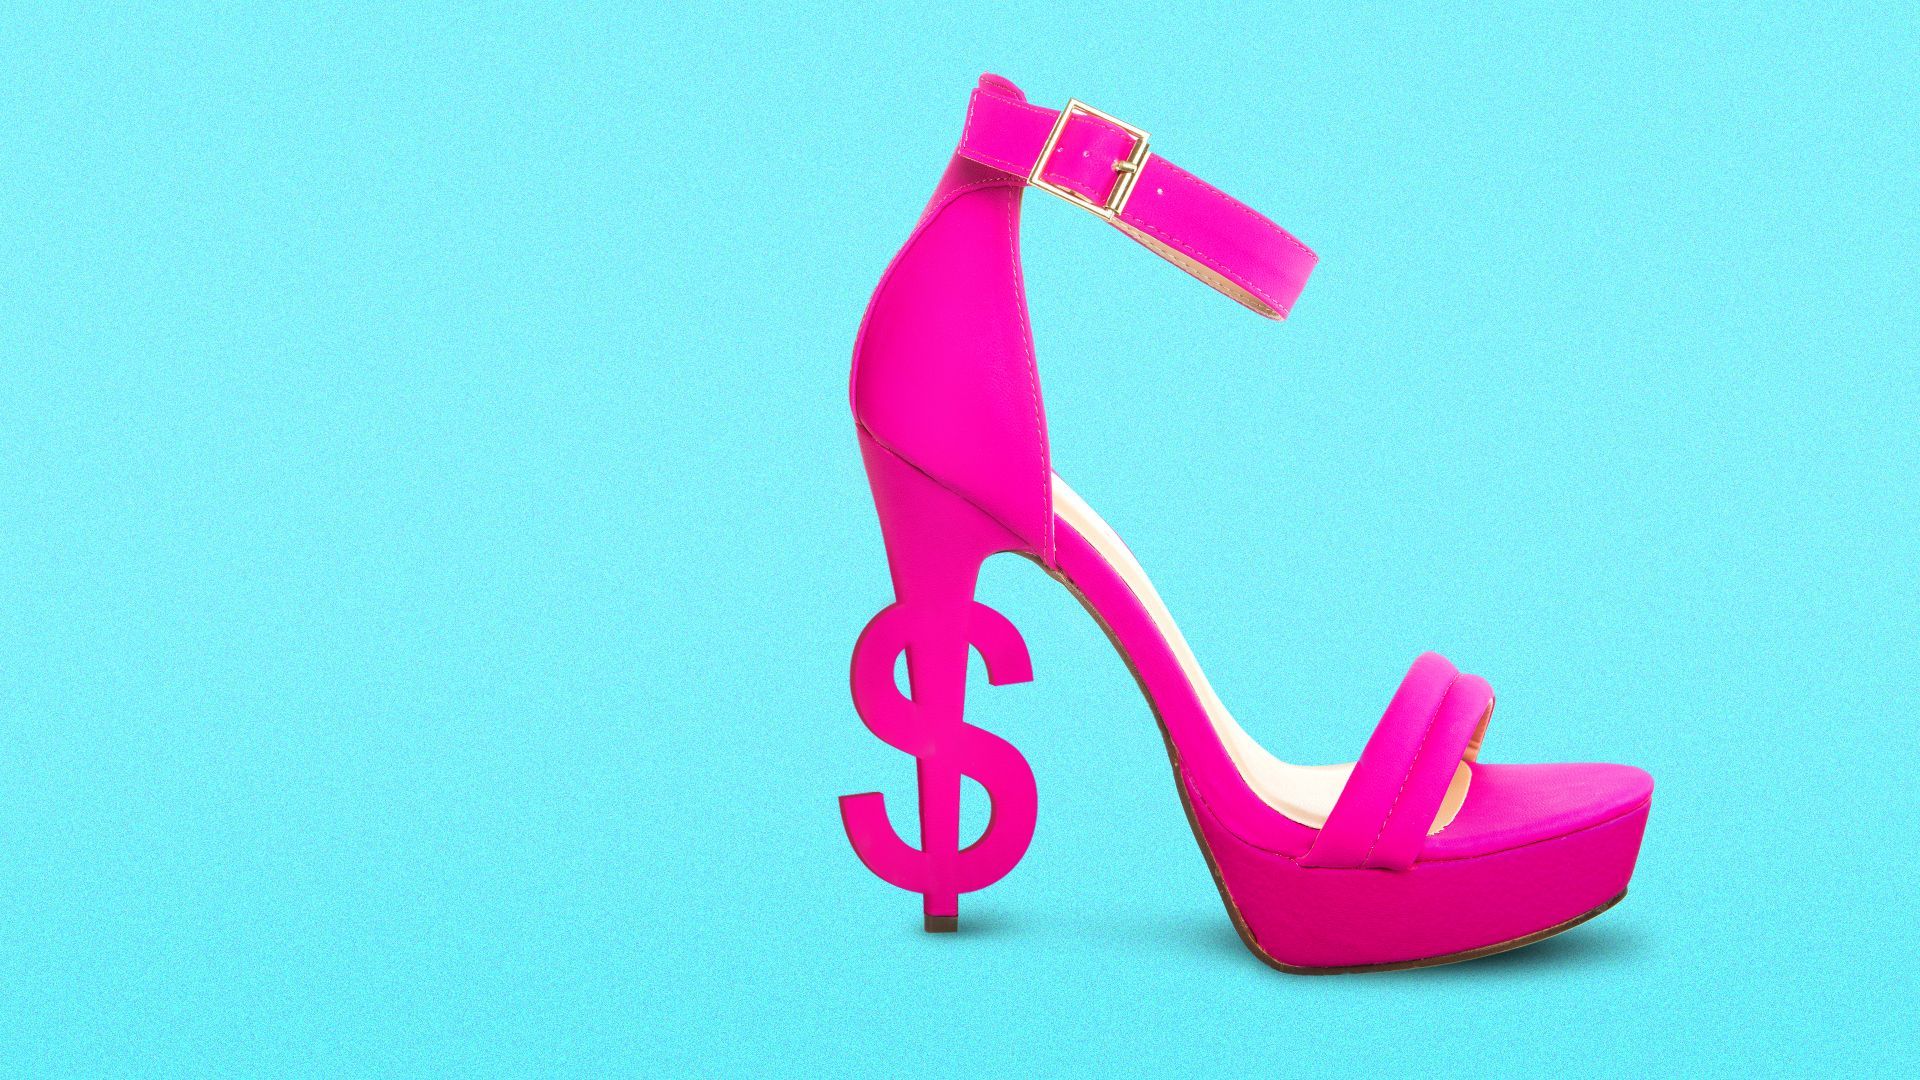 an illustration of a high heel shoe with a dollar sign formed on the heel